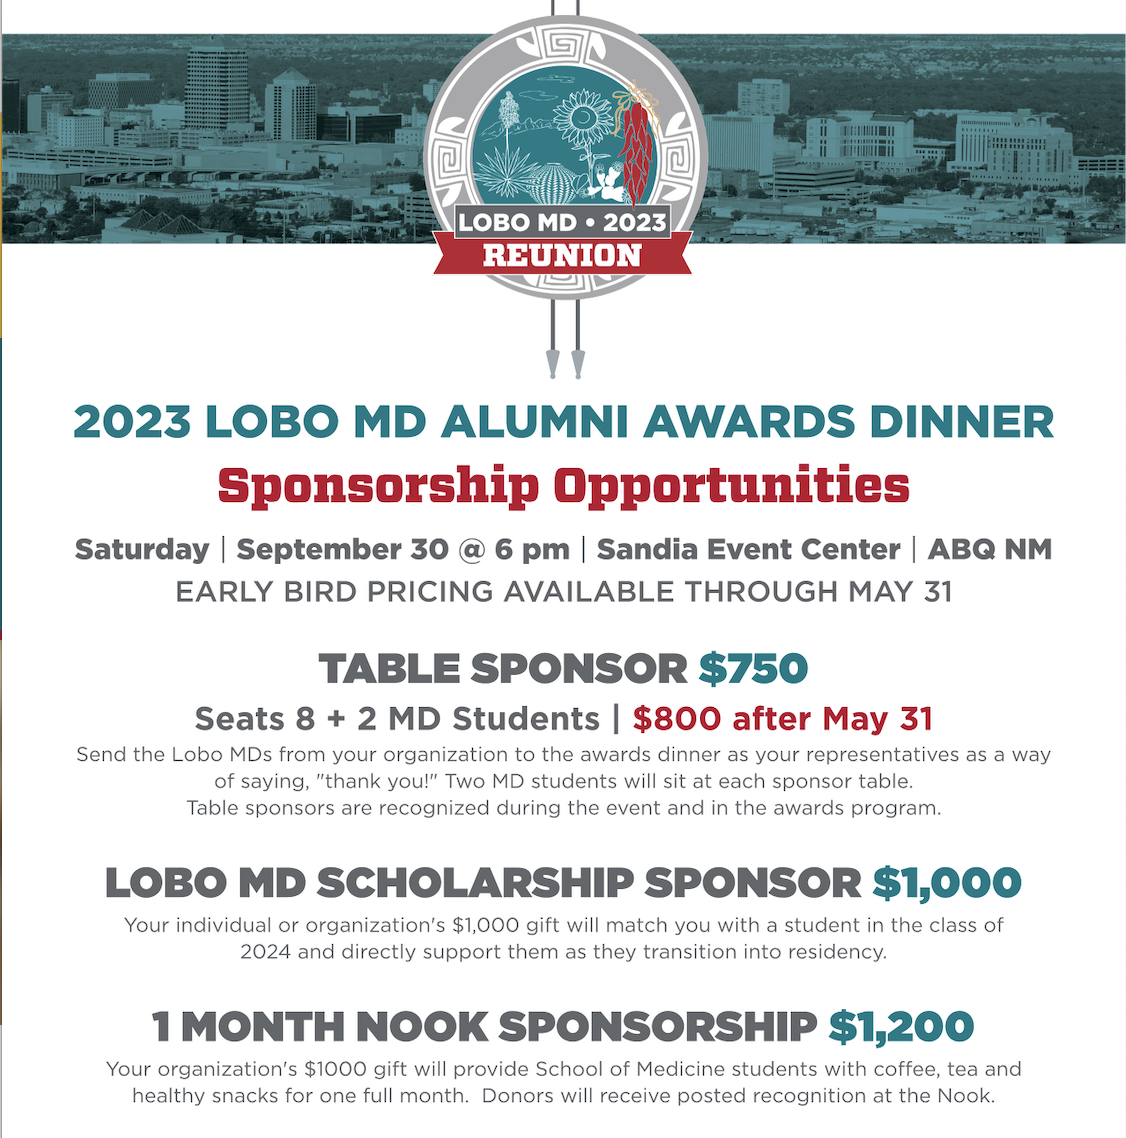 Sponsorship Opportunities for the 2023 Lobo MD Reunion